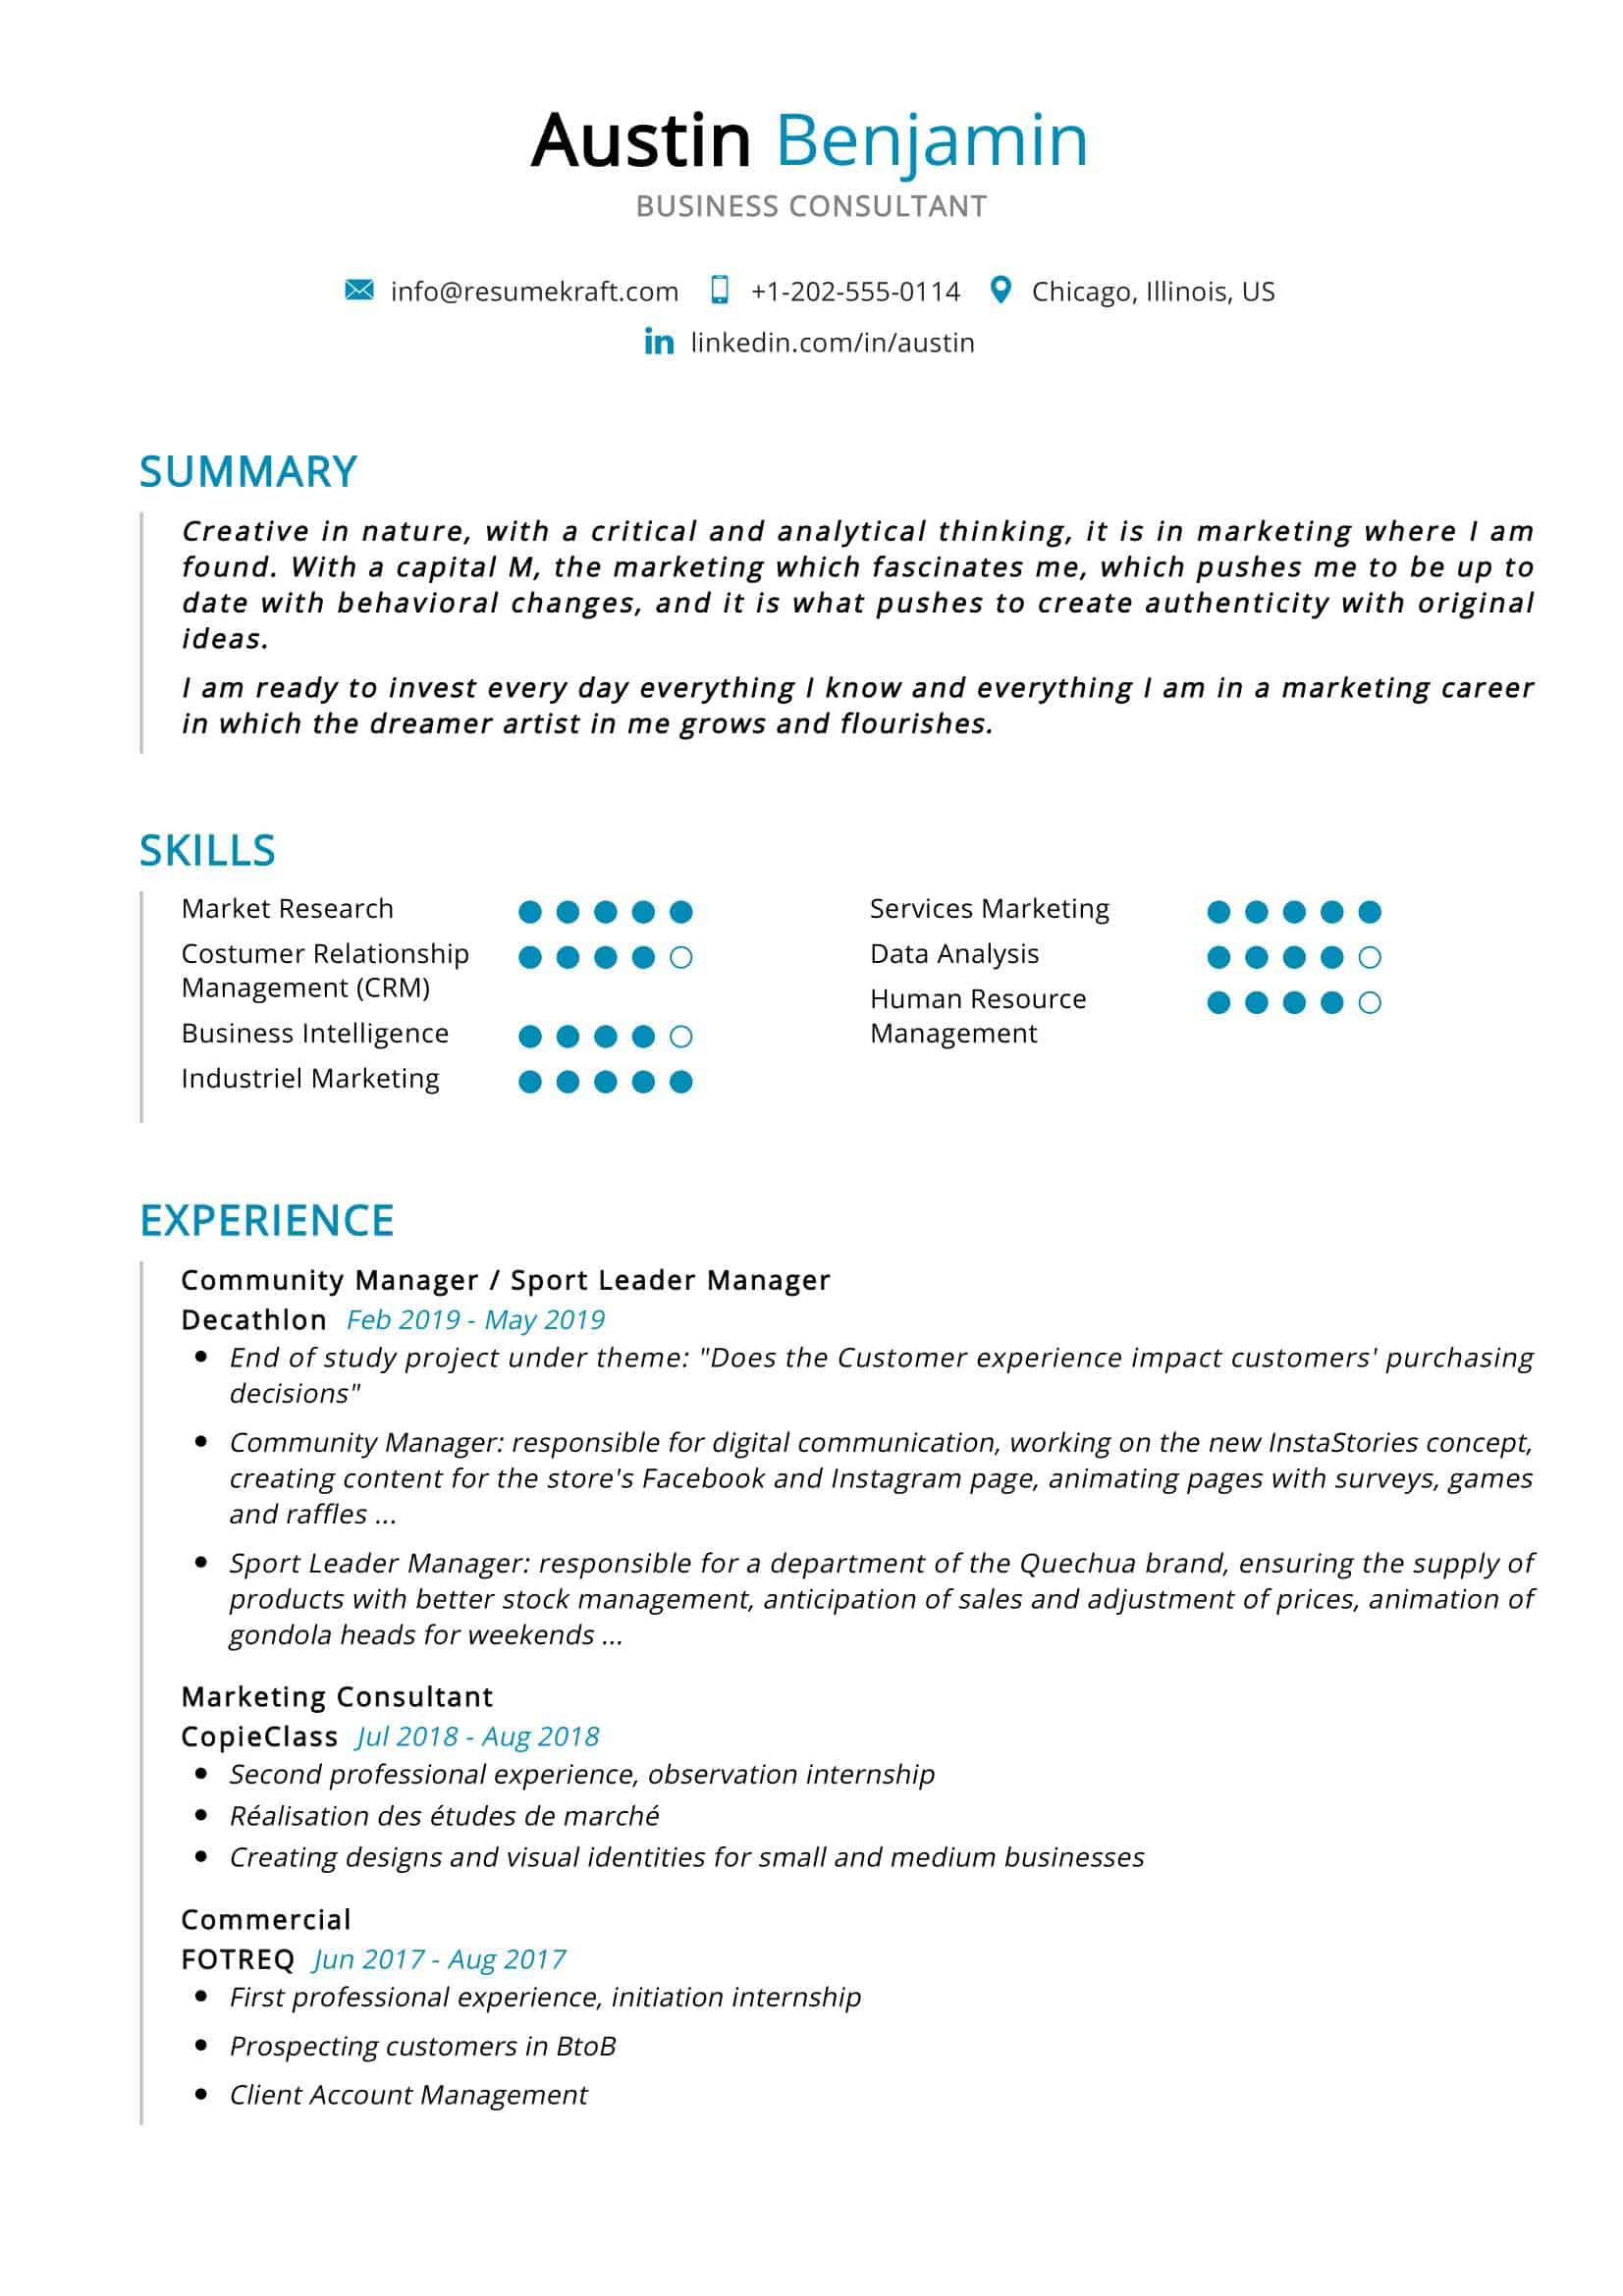 Financial Services Technology Consultant Resume Sample Business Consultant Resume Sample 2022 Writing Tips – Resumekraft